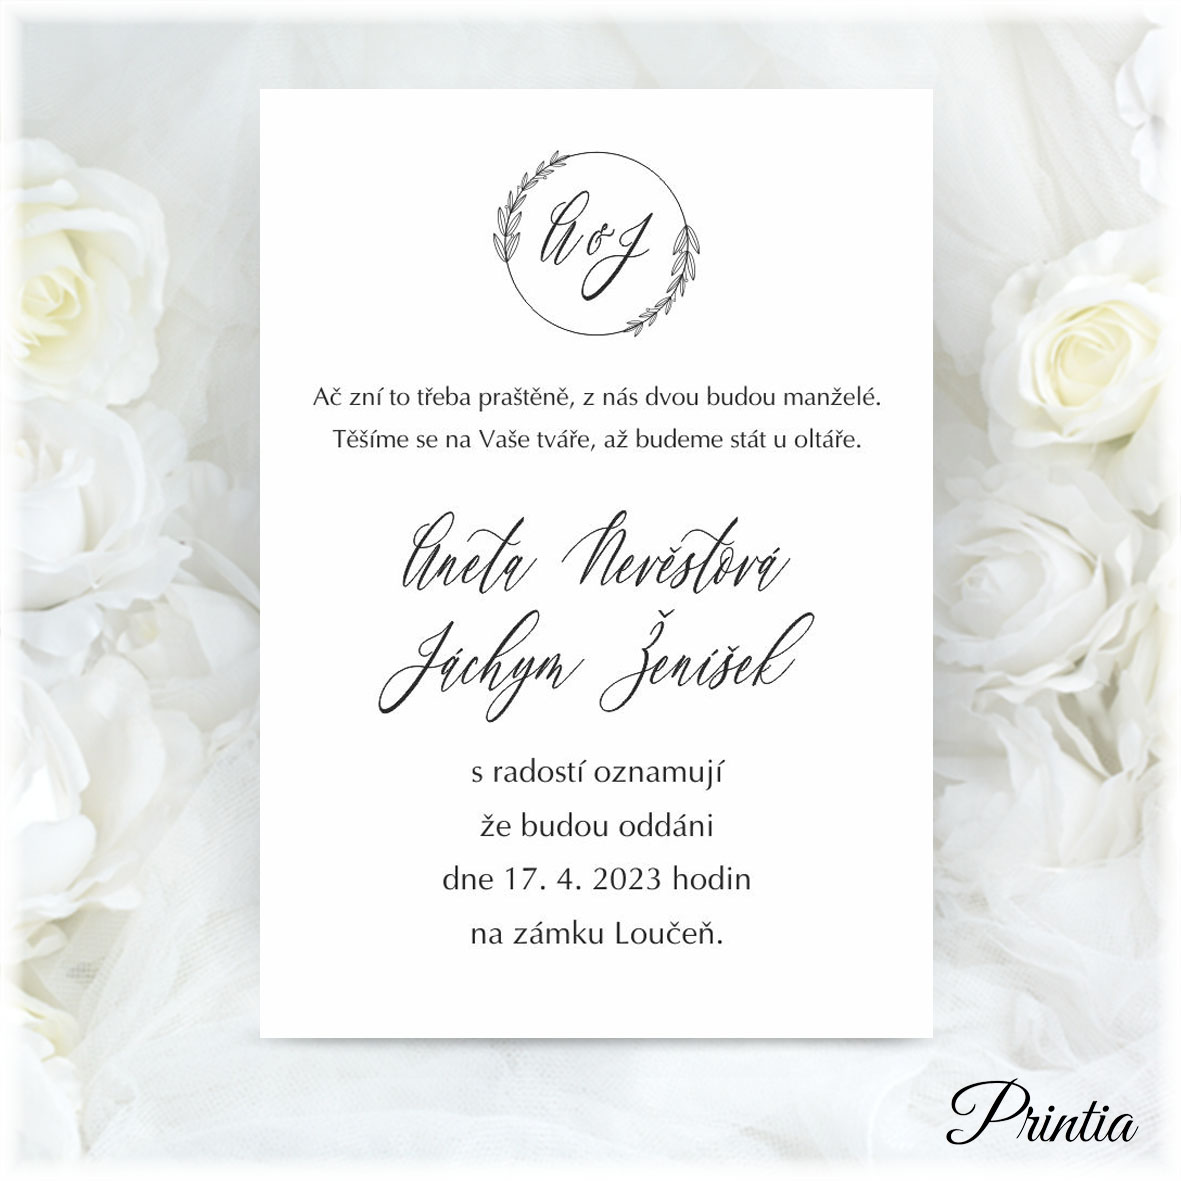 Wedding invitation with initials in a wreath